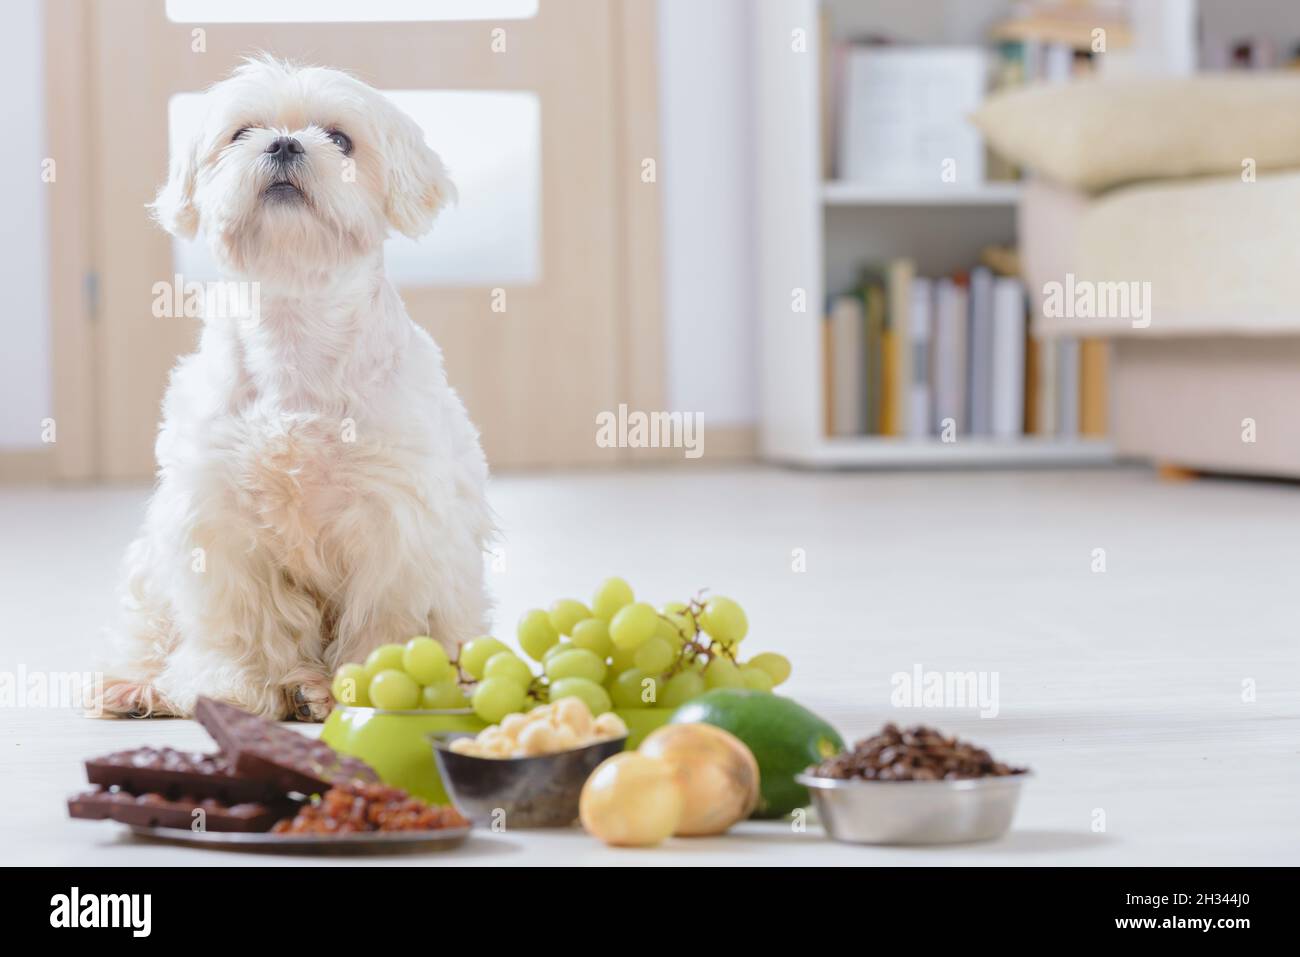 Little white maltese dog and food ingredients toxic to him Stock Photo